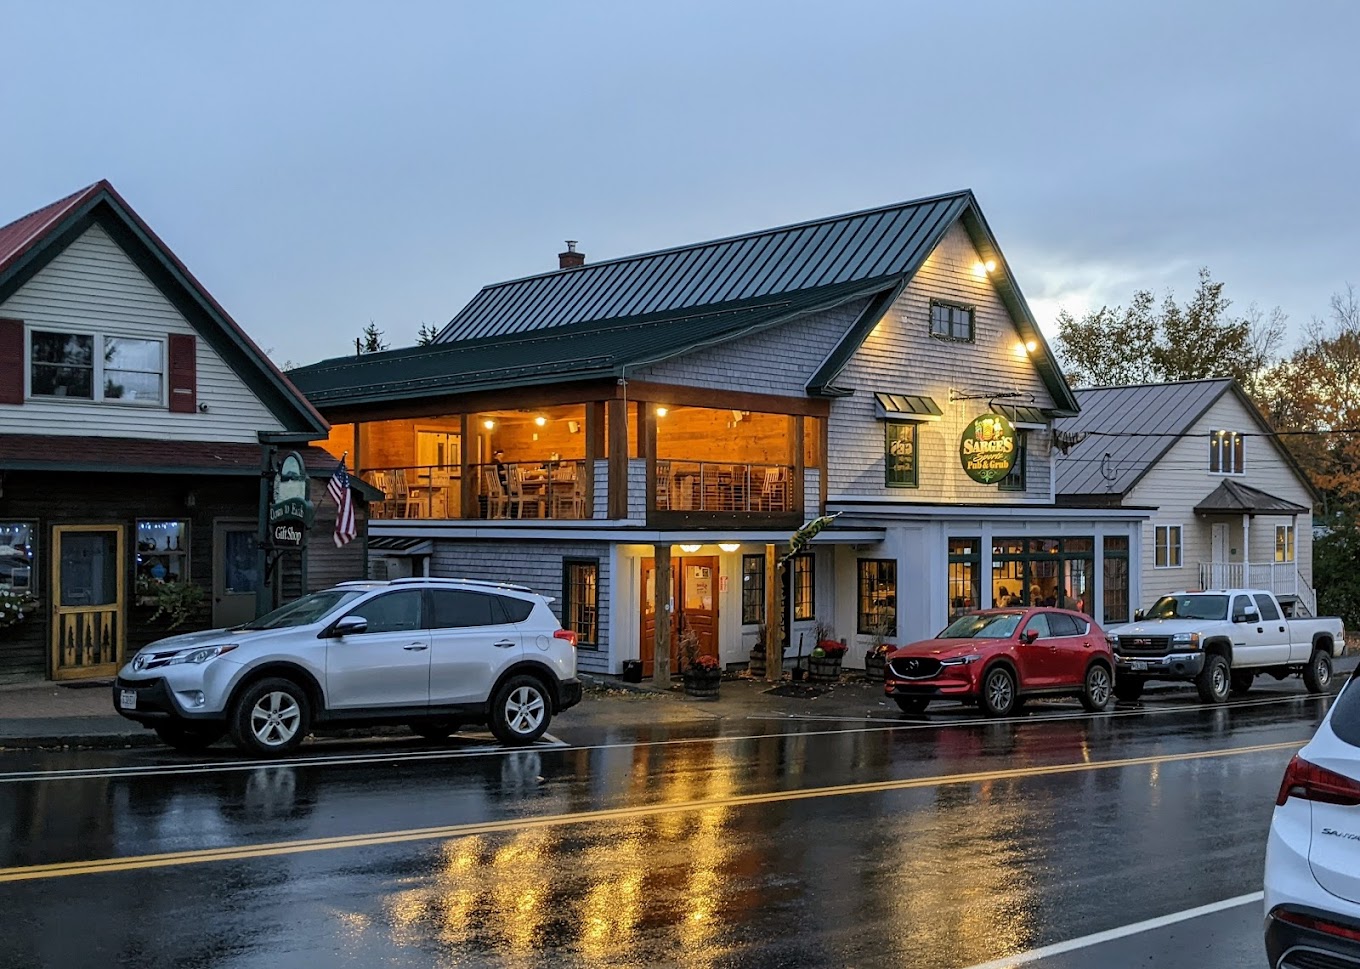 Sarge's Pub & Grub as seen from Main Street in Rangeley